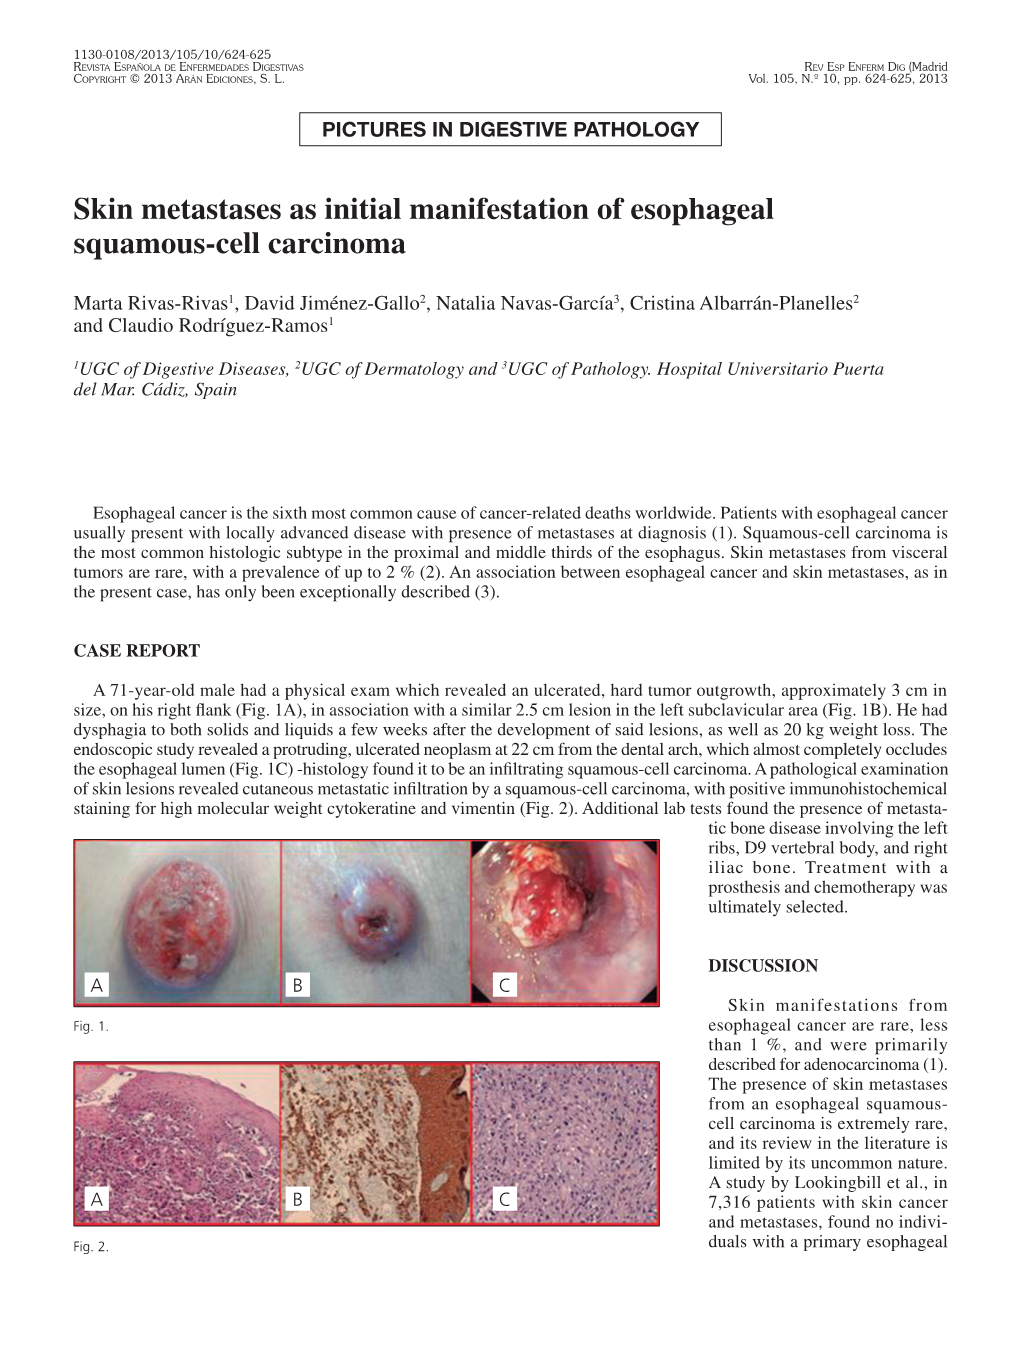 Skin Metastases As Initial Manifestation of Esophageal Squamous-Cell Carcinoma